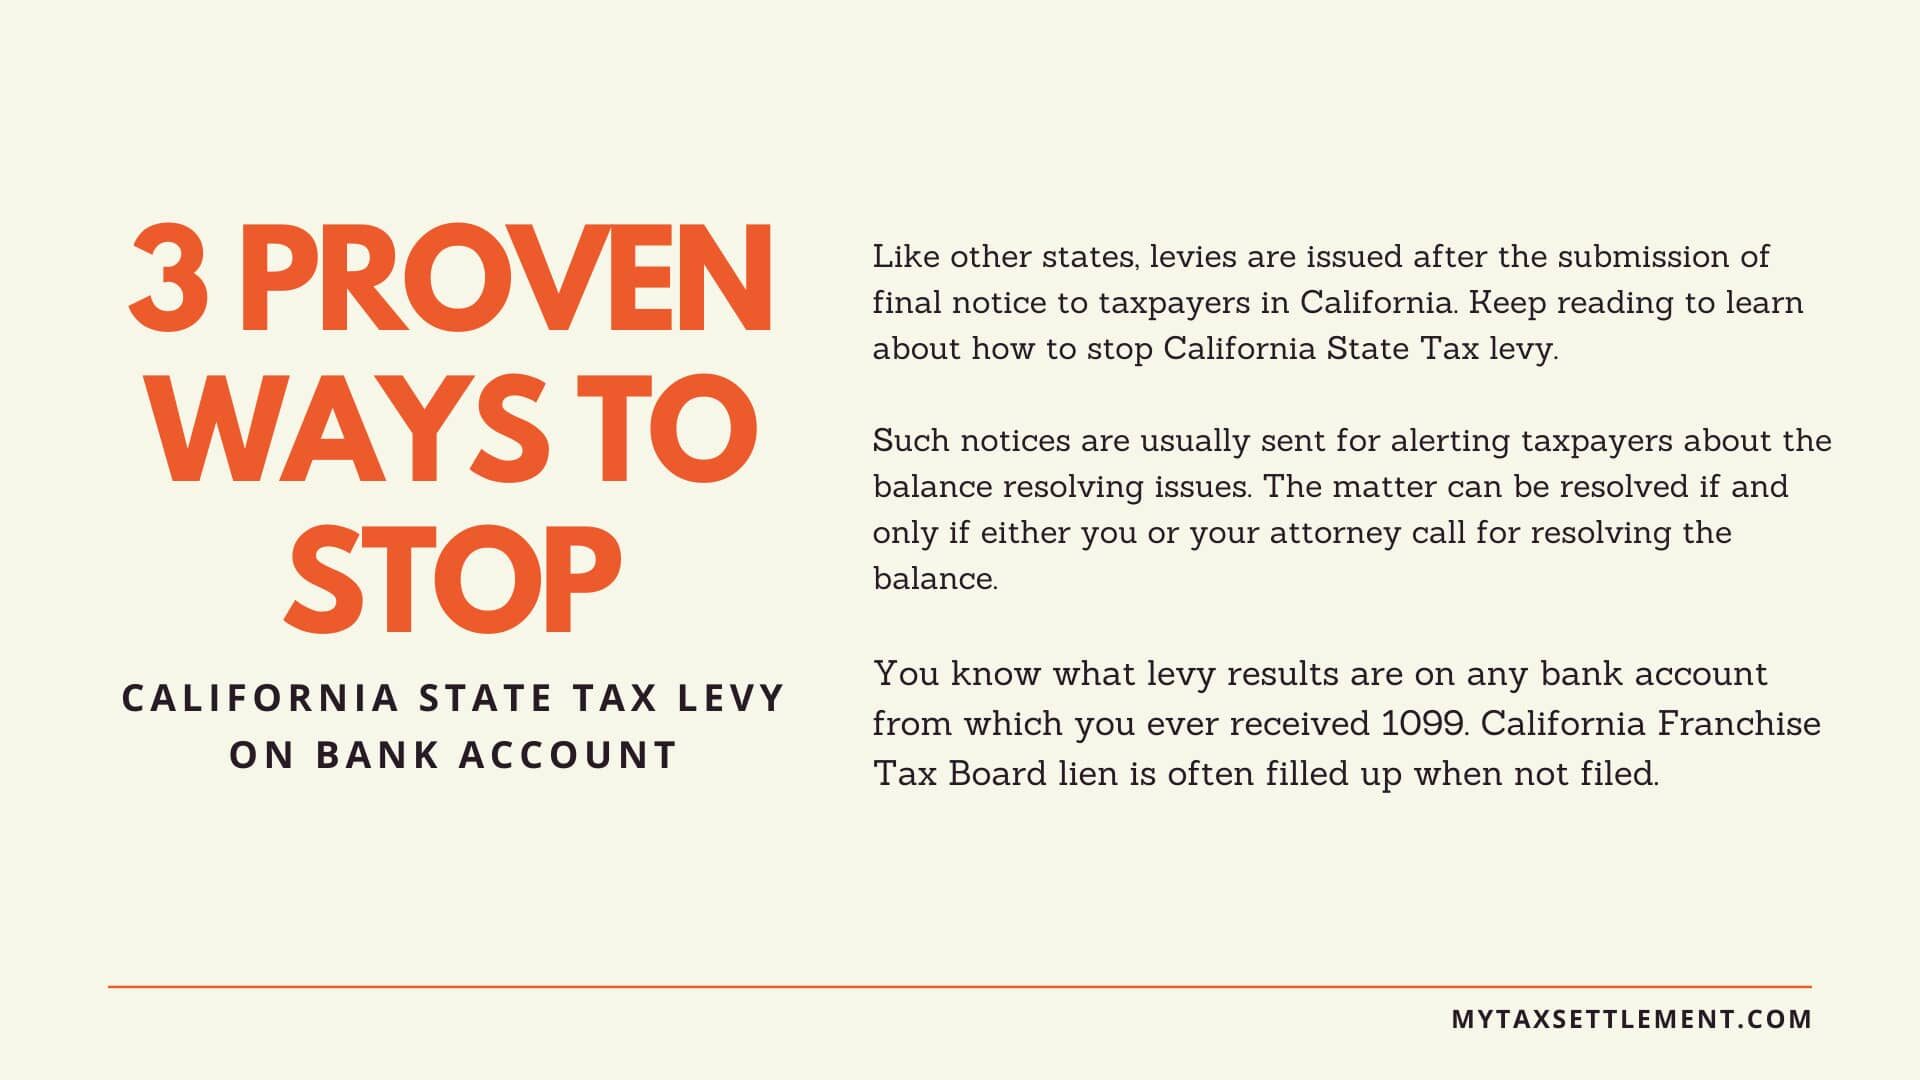 Proven Ways to Stop California State Tax levy